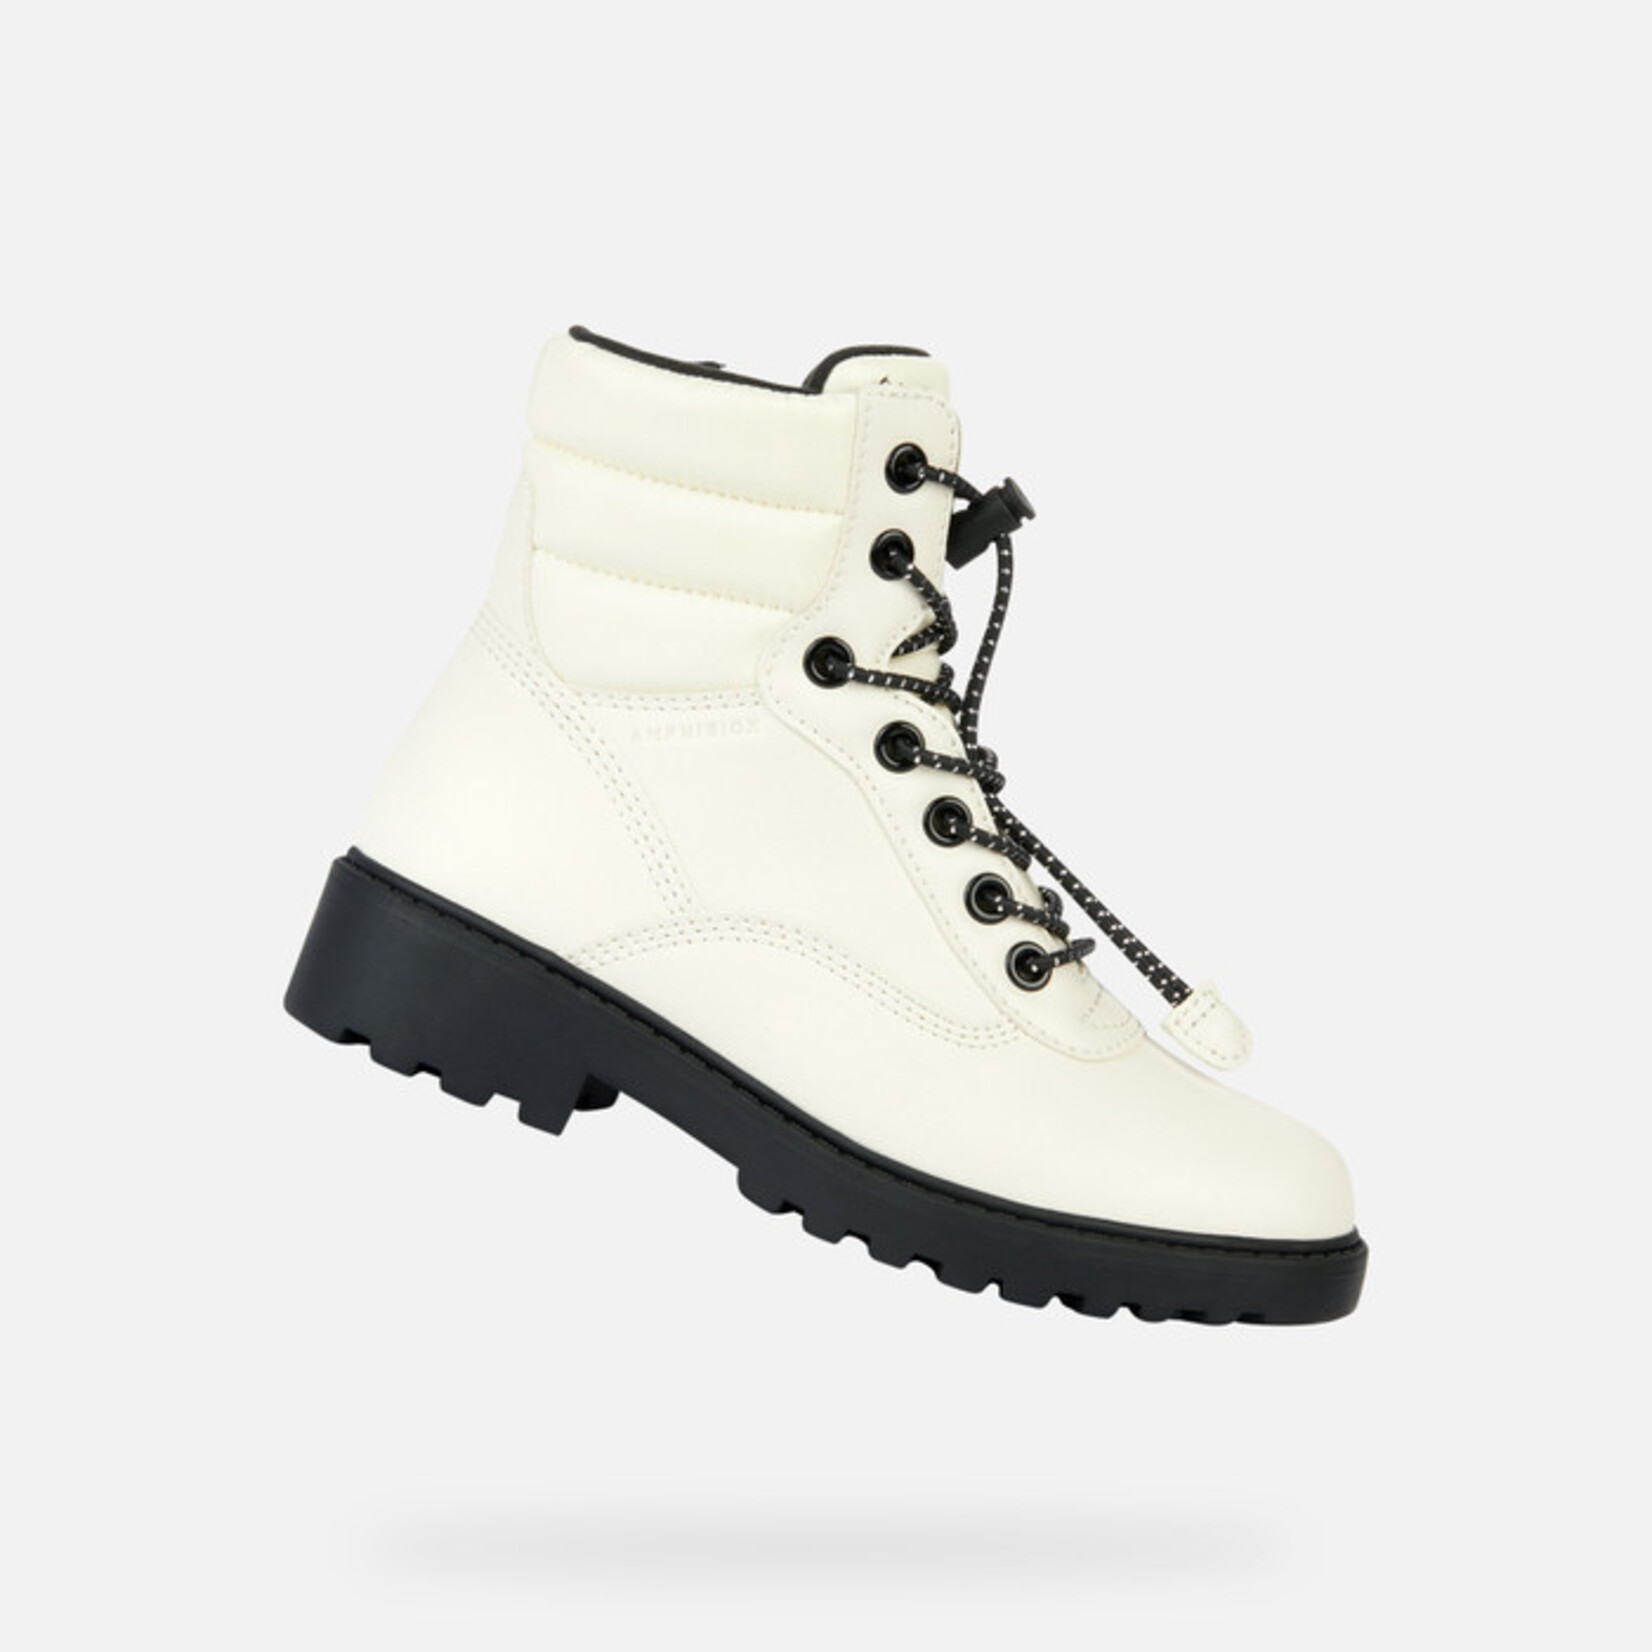 Geox Geox Casey Ankle Boot Light Ivory/Black